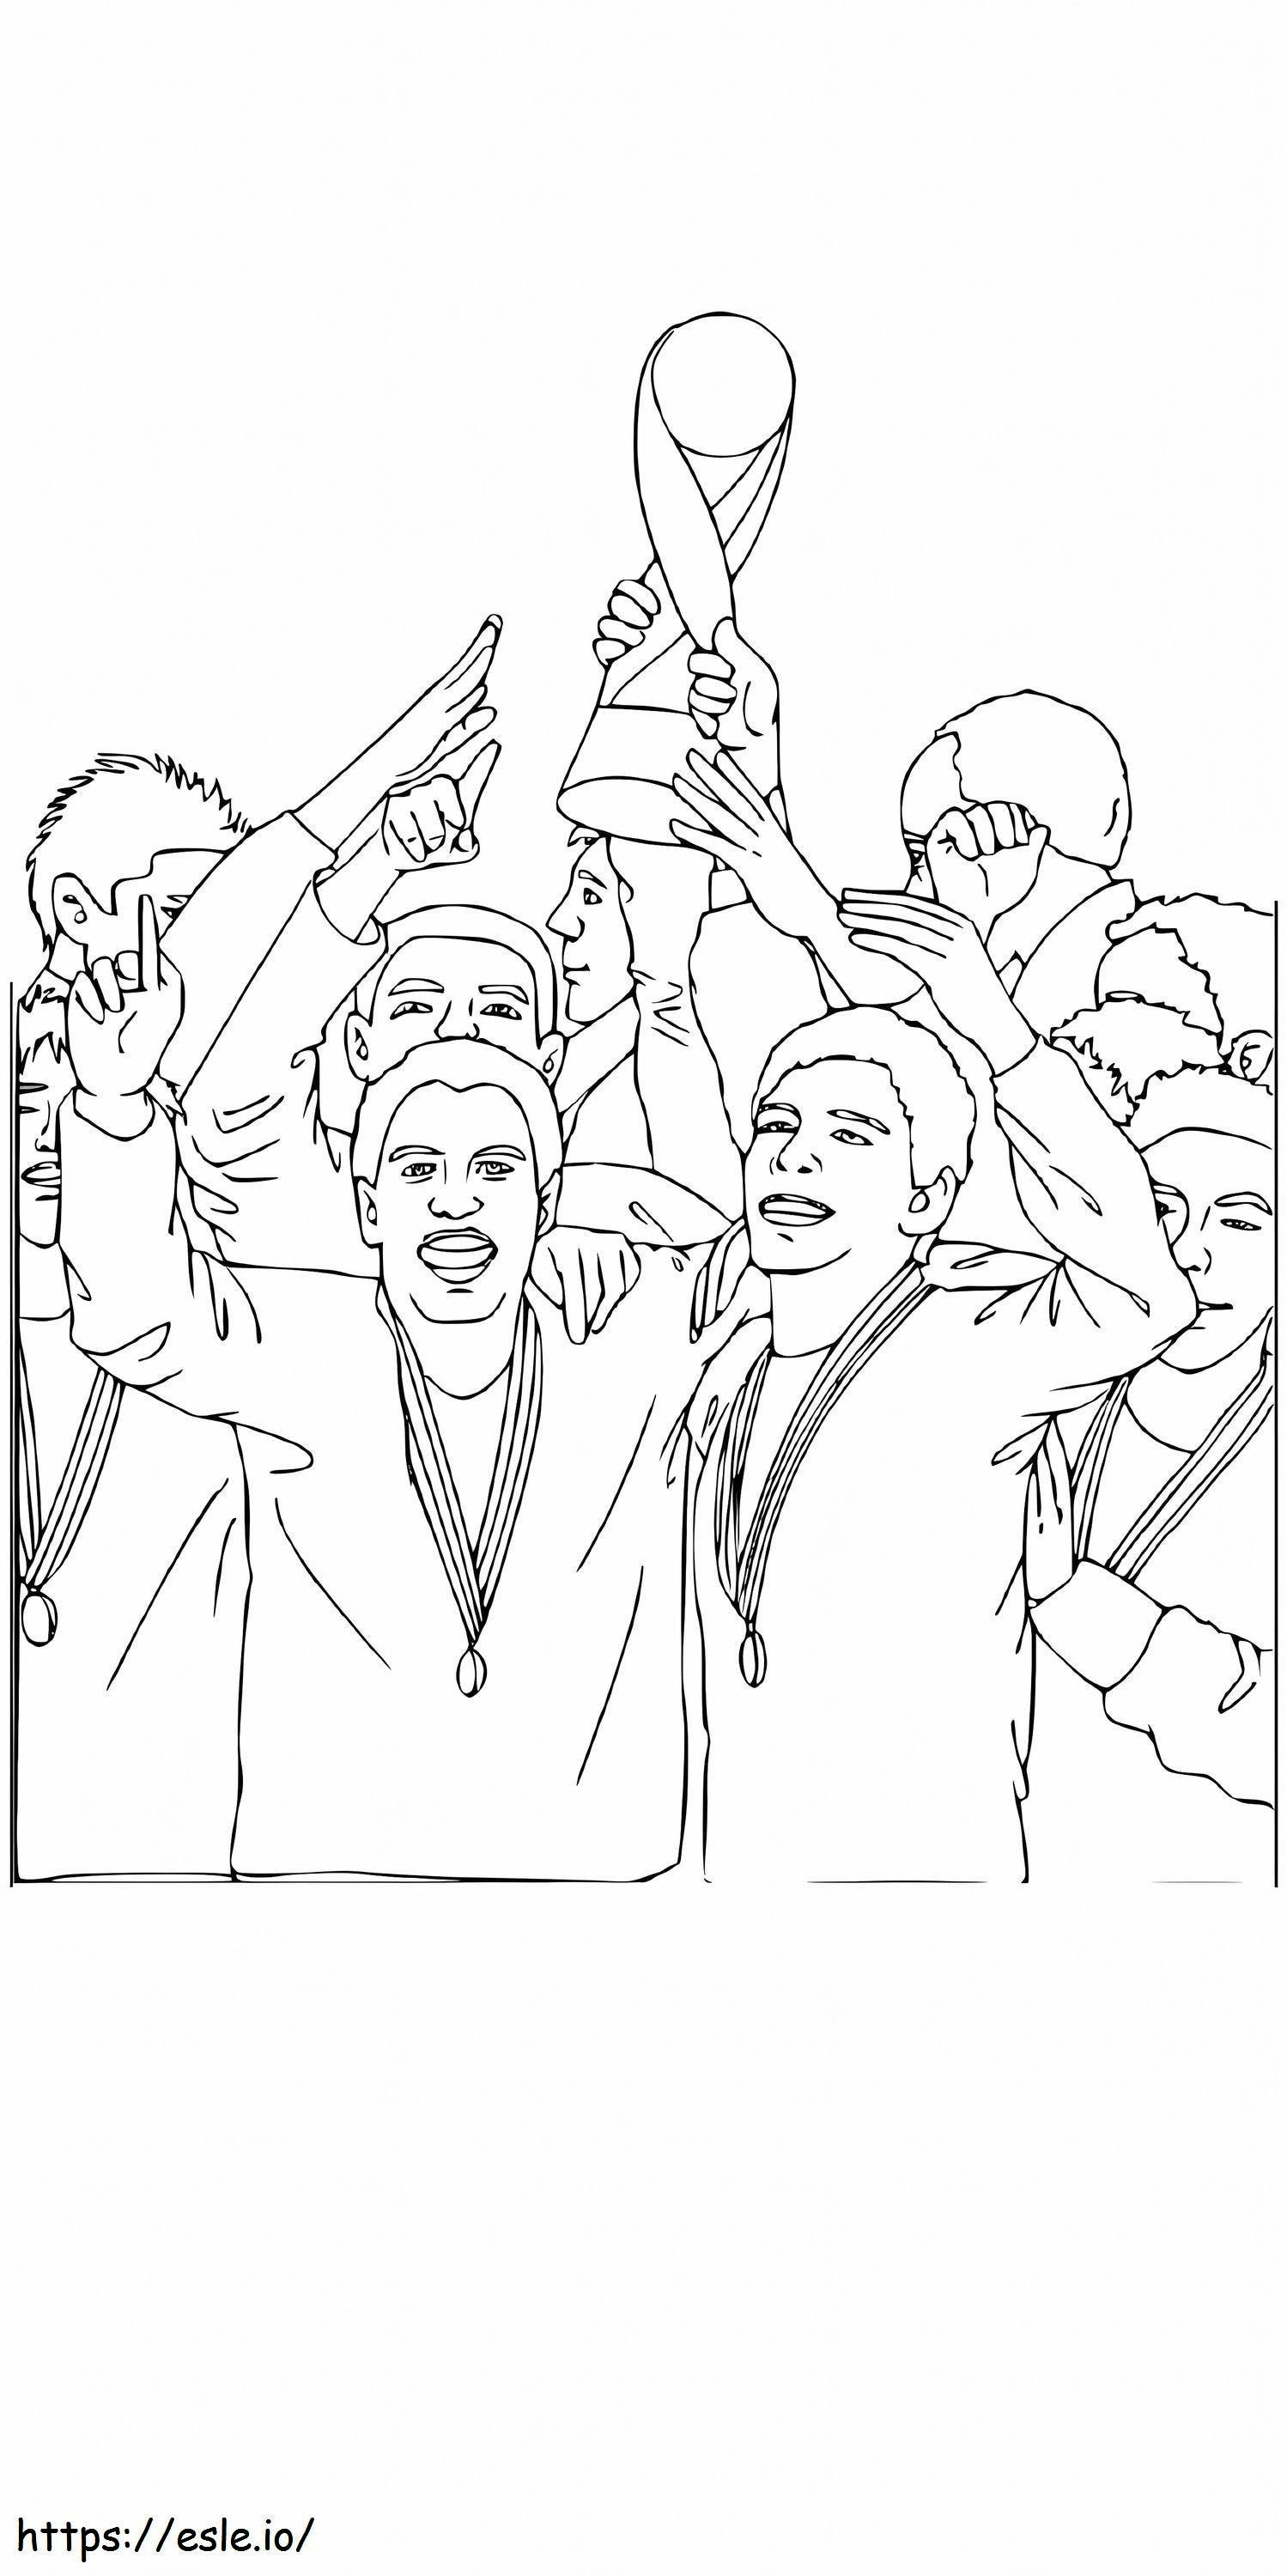 The World Cup Trophy coloring page